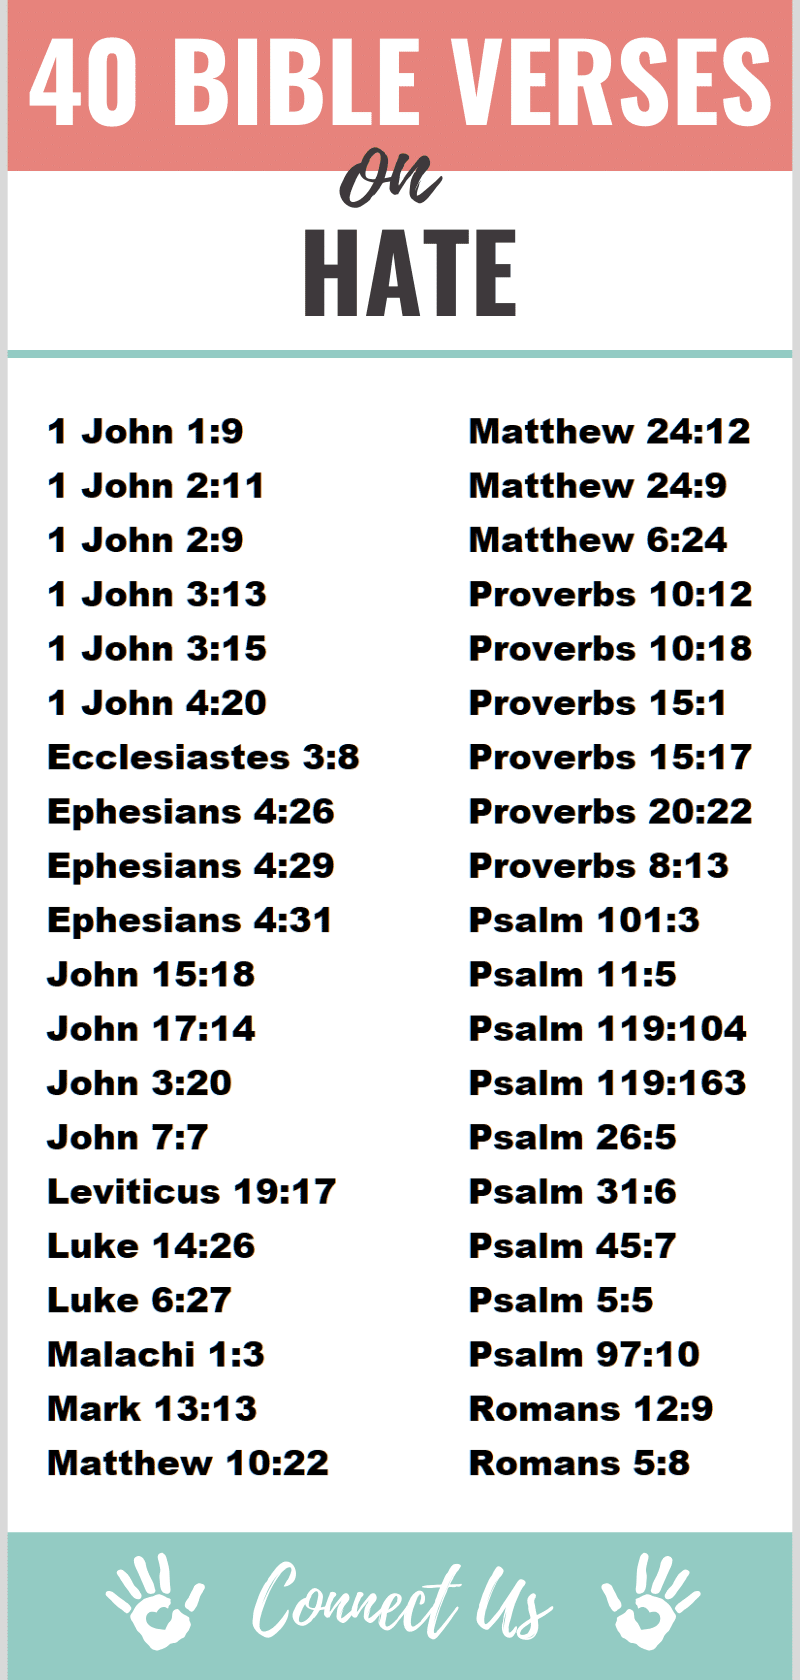 Bible Verses on Hate